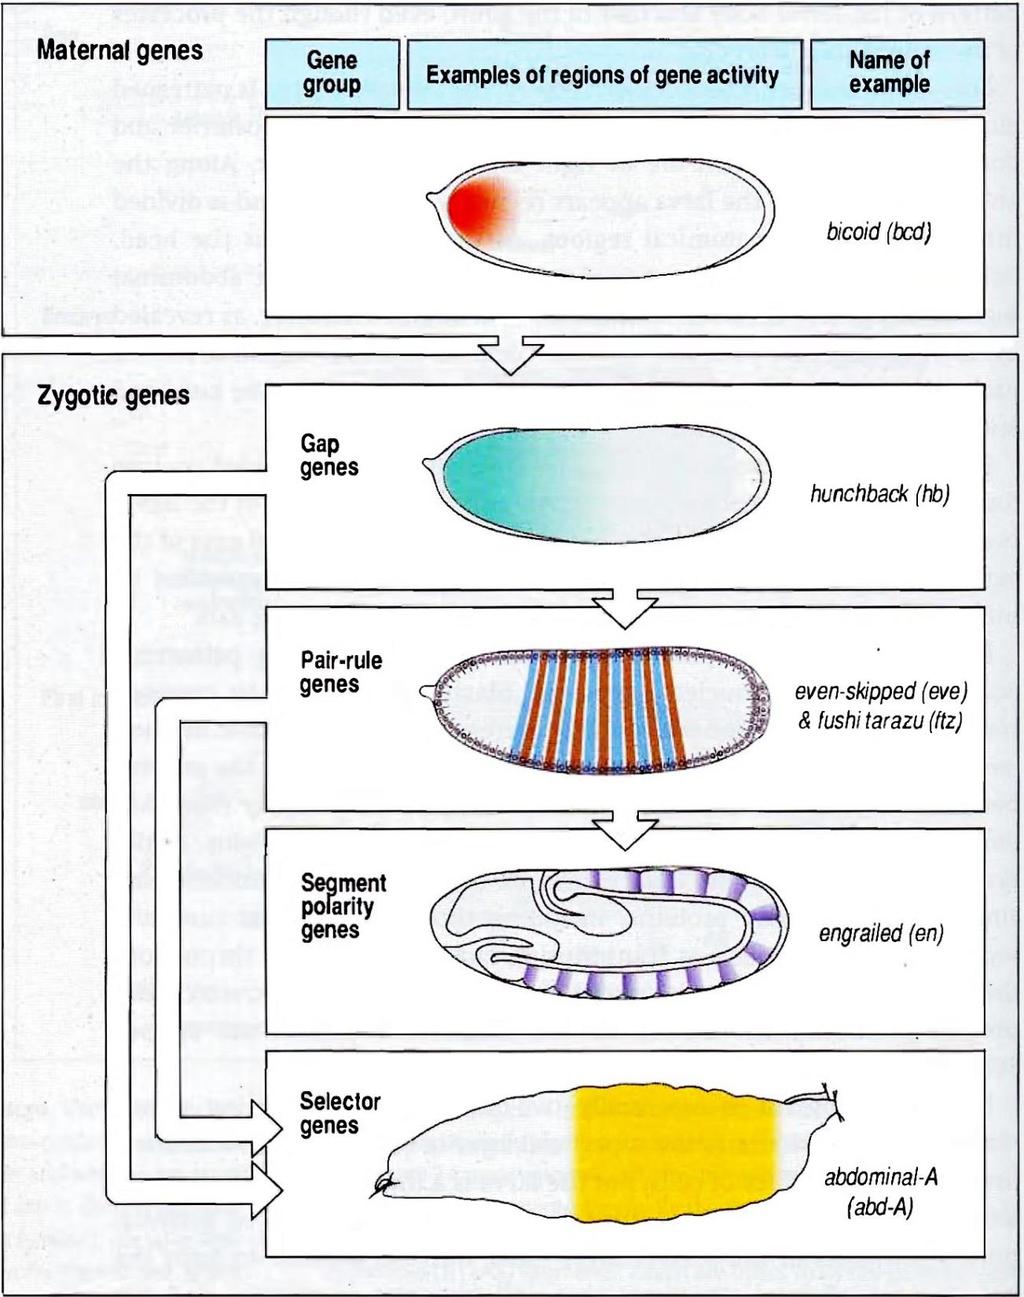 Products of the maternal genes regulate the regional expression of the gap genes Gap genes control the localized expression of the pair-rule genes Pair rule genes activate specific segment polarity